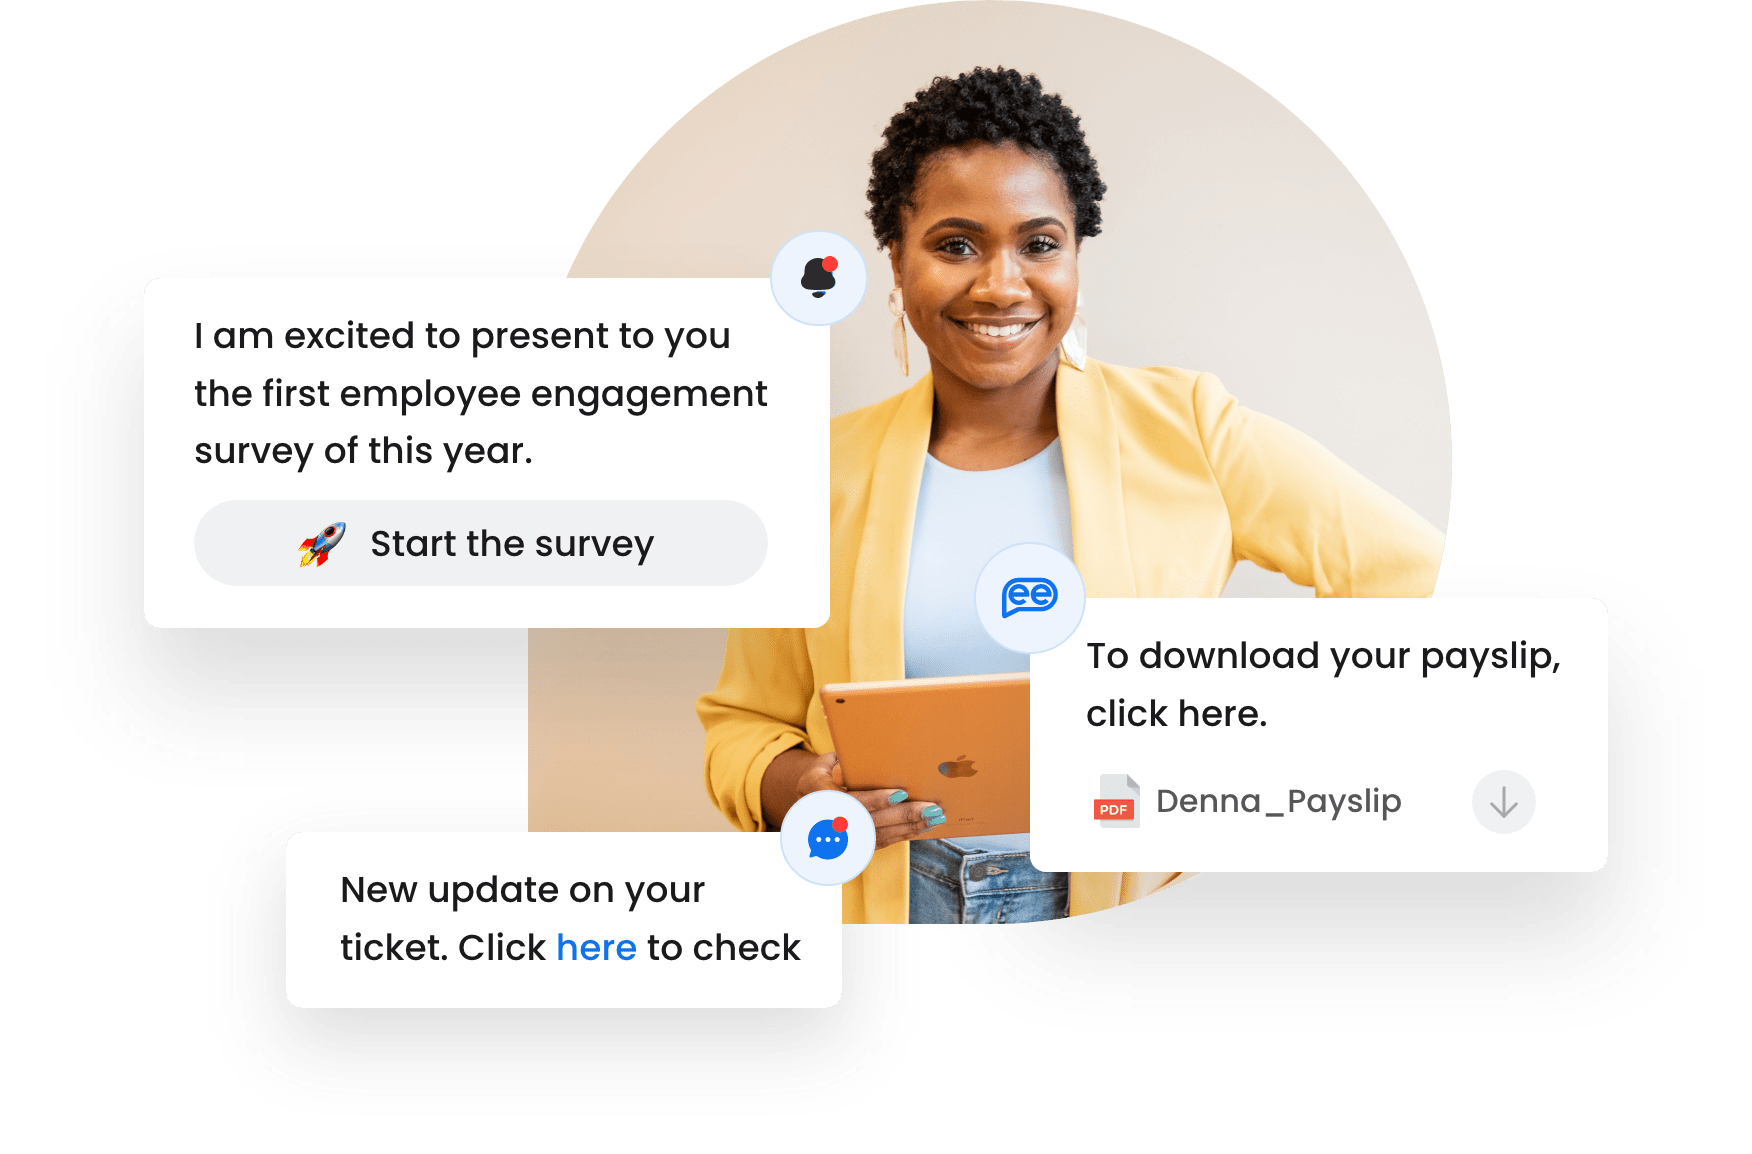 Transform your employee experience with AI